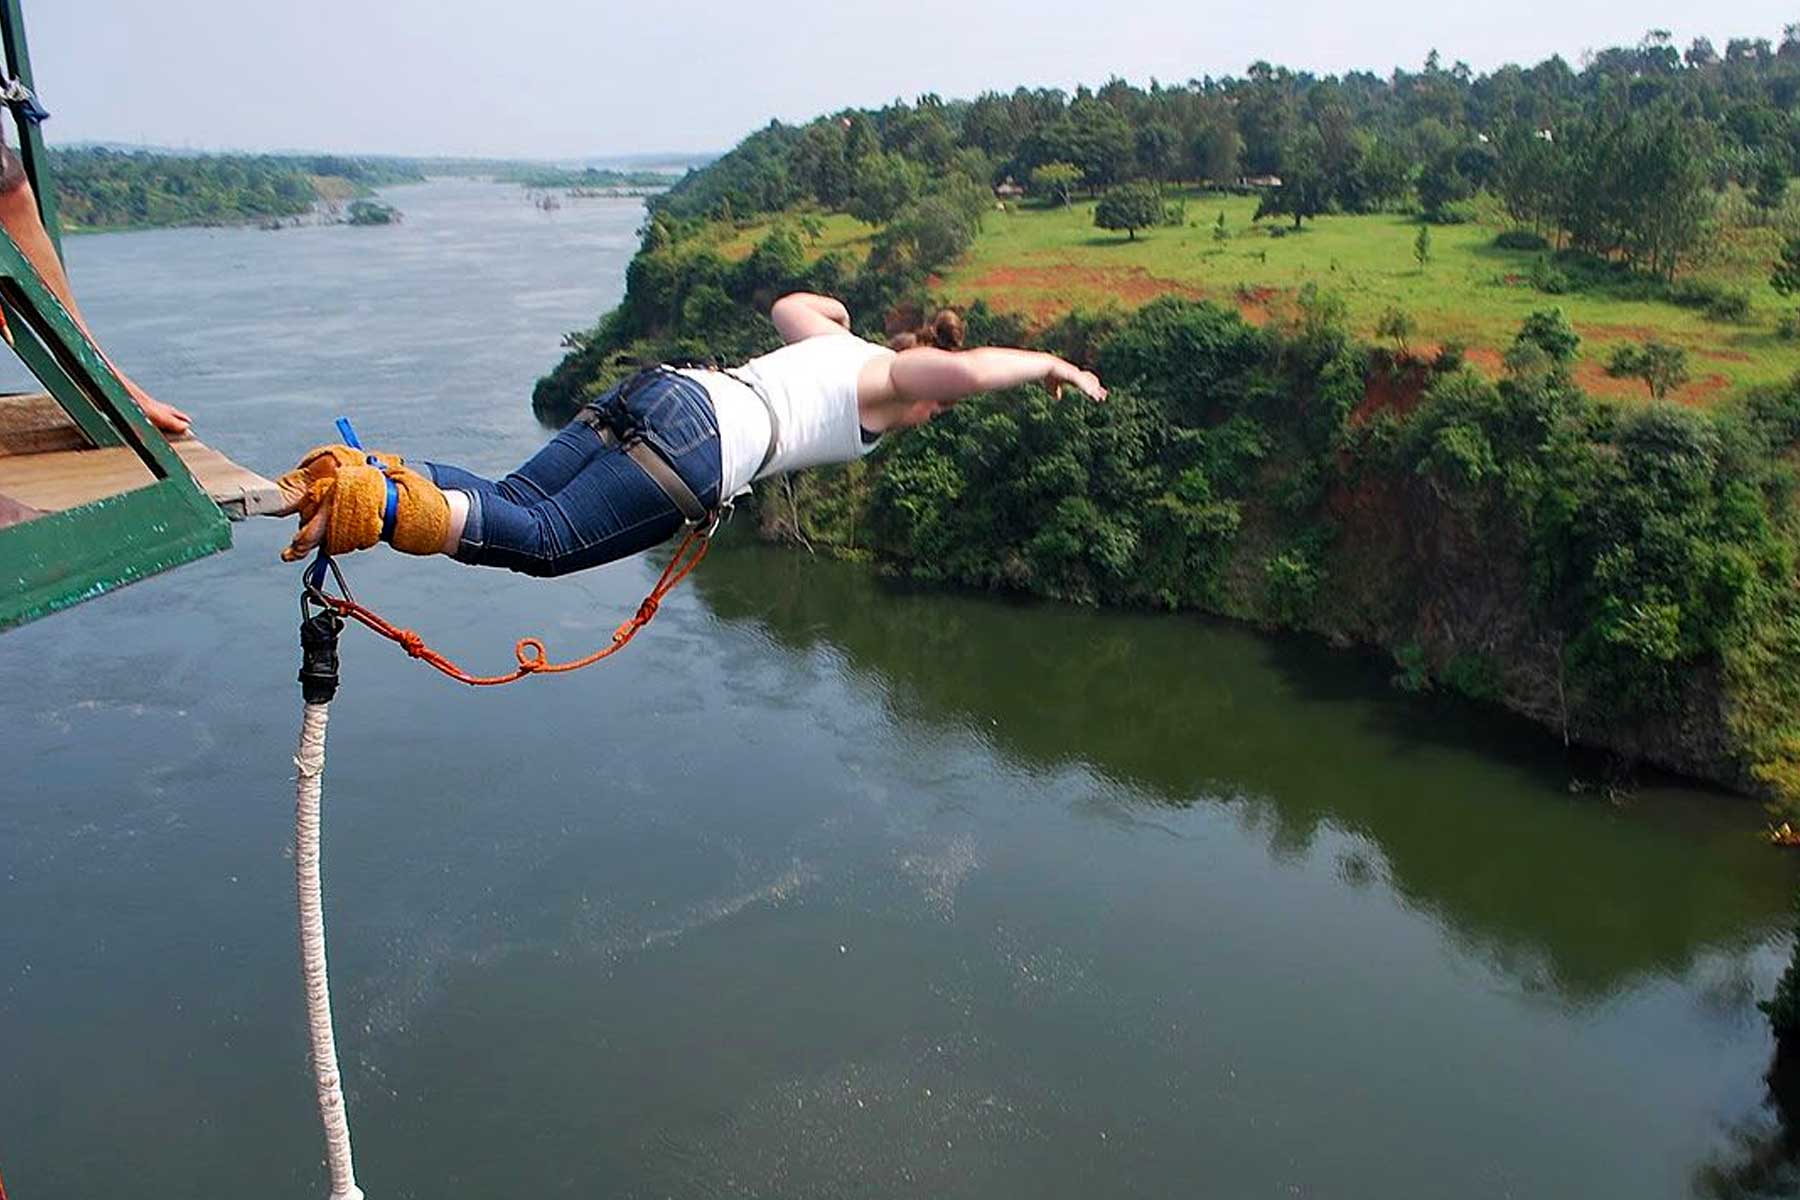 The Nile Bungee Jumping Experience